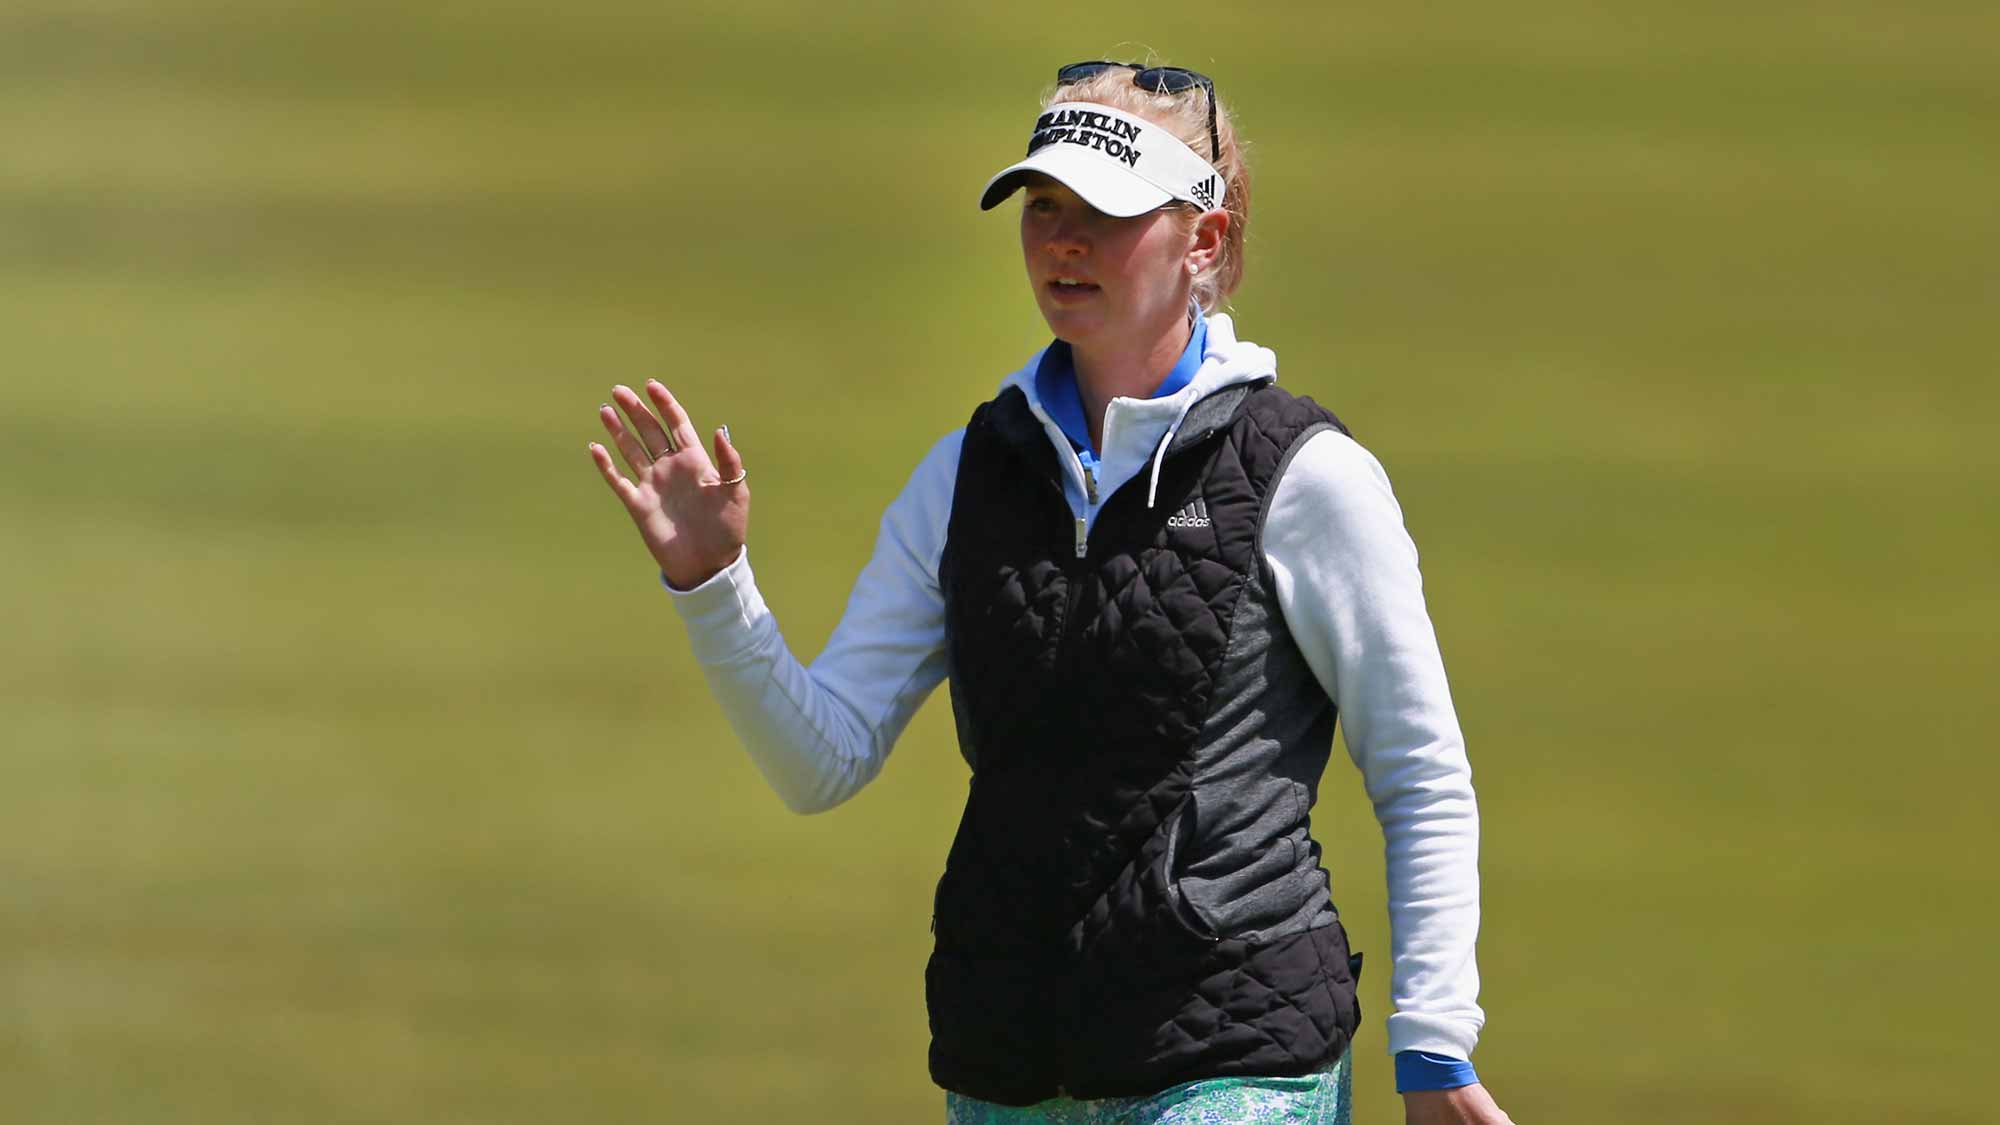 Jessica Korda waves to the gallery after making a par on the third hole during the final round of the LPGA MEDIHEAL Championship at Lake Merced Golf Club on April 29, 2018 in Daly City, California